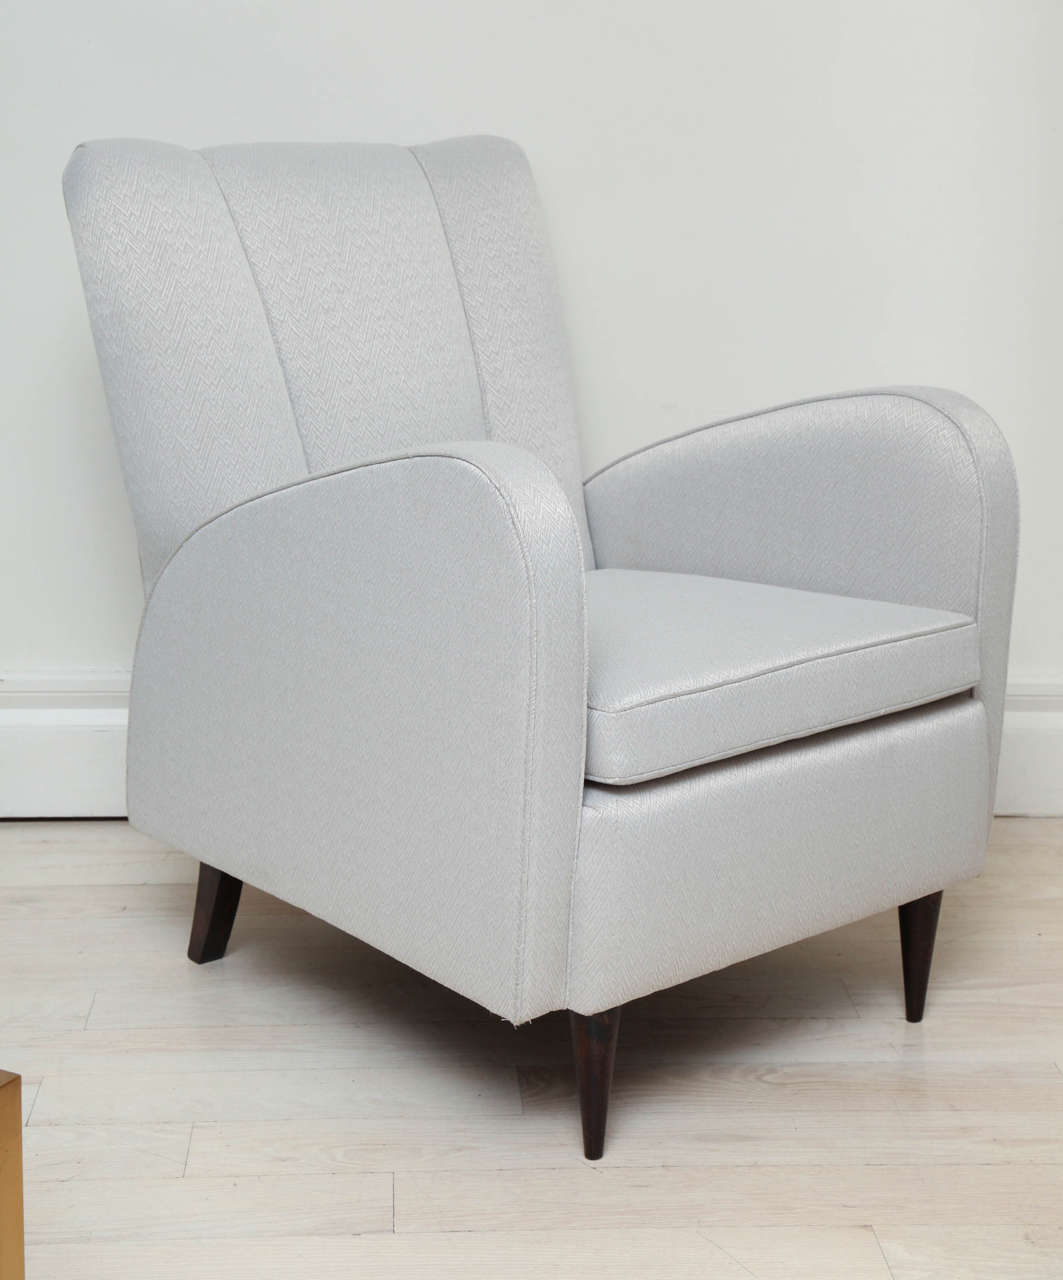 Pair of upholstered stylized Art Deco armchairs with shaped channeled backs and wood legs.